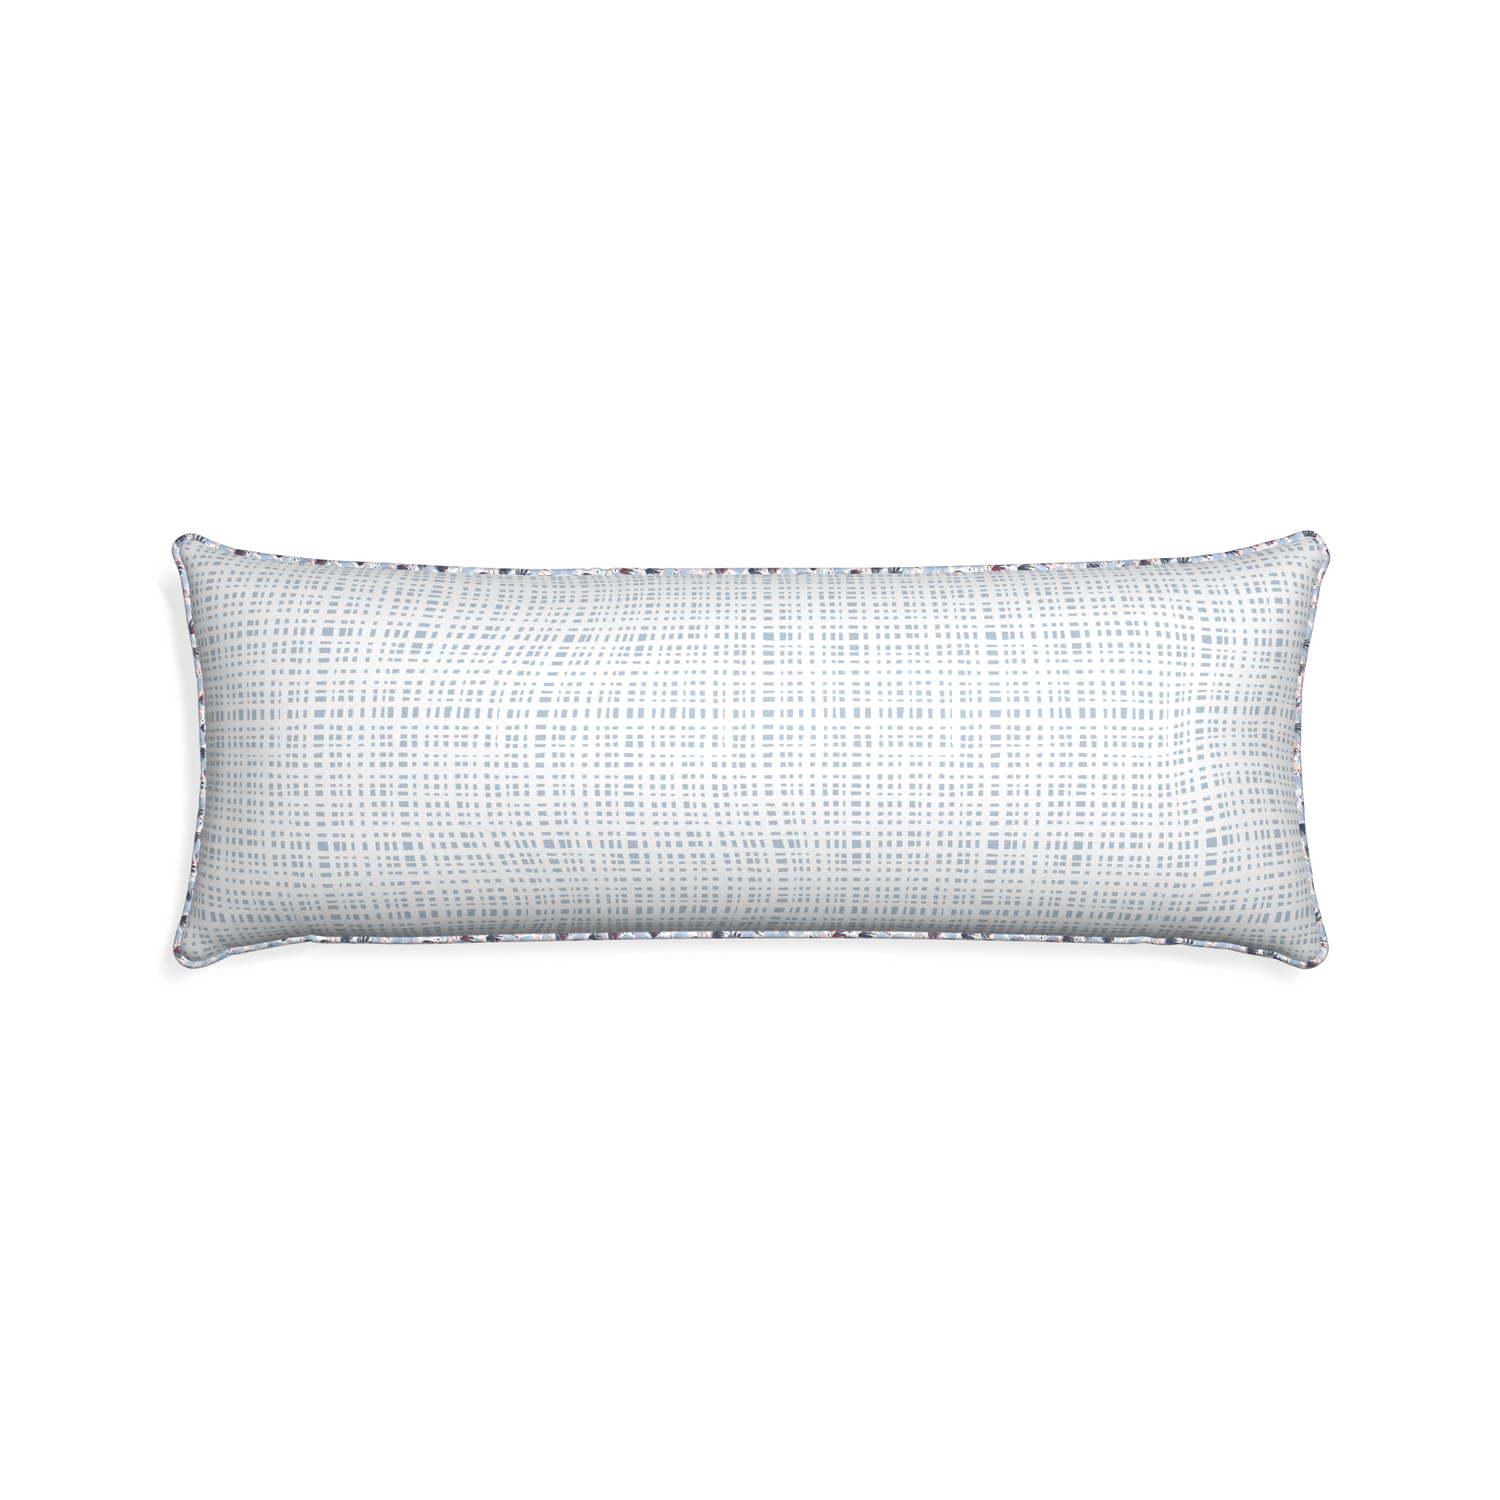 Xl-lumbar ginger sky custom plaid sky bluepillow with e piping on white background